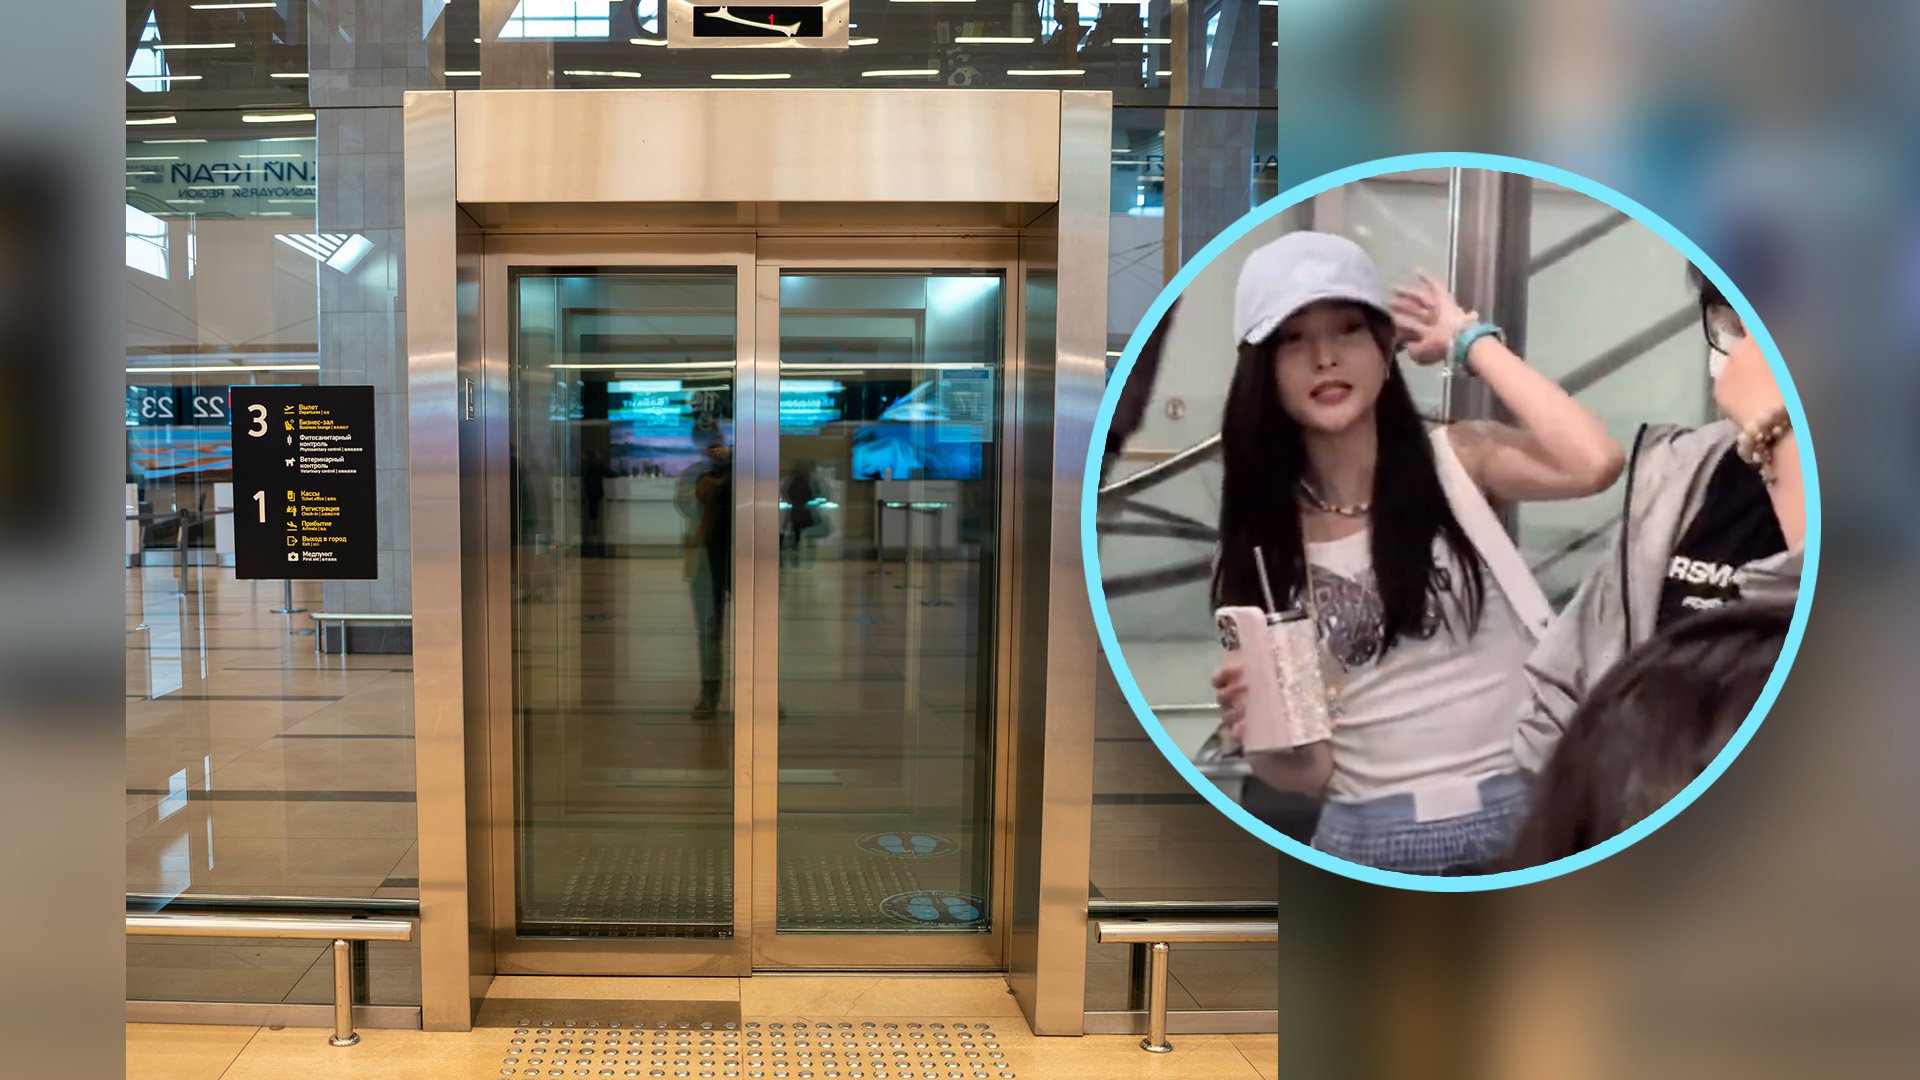 Public fury erupted on mainland social media after the bodyguard of a celebrity in China demanded lift passengers vacate it for her exclusive use. Photo: SCMP composite/Shutterstock/Weibo